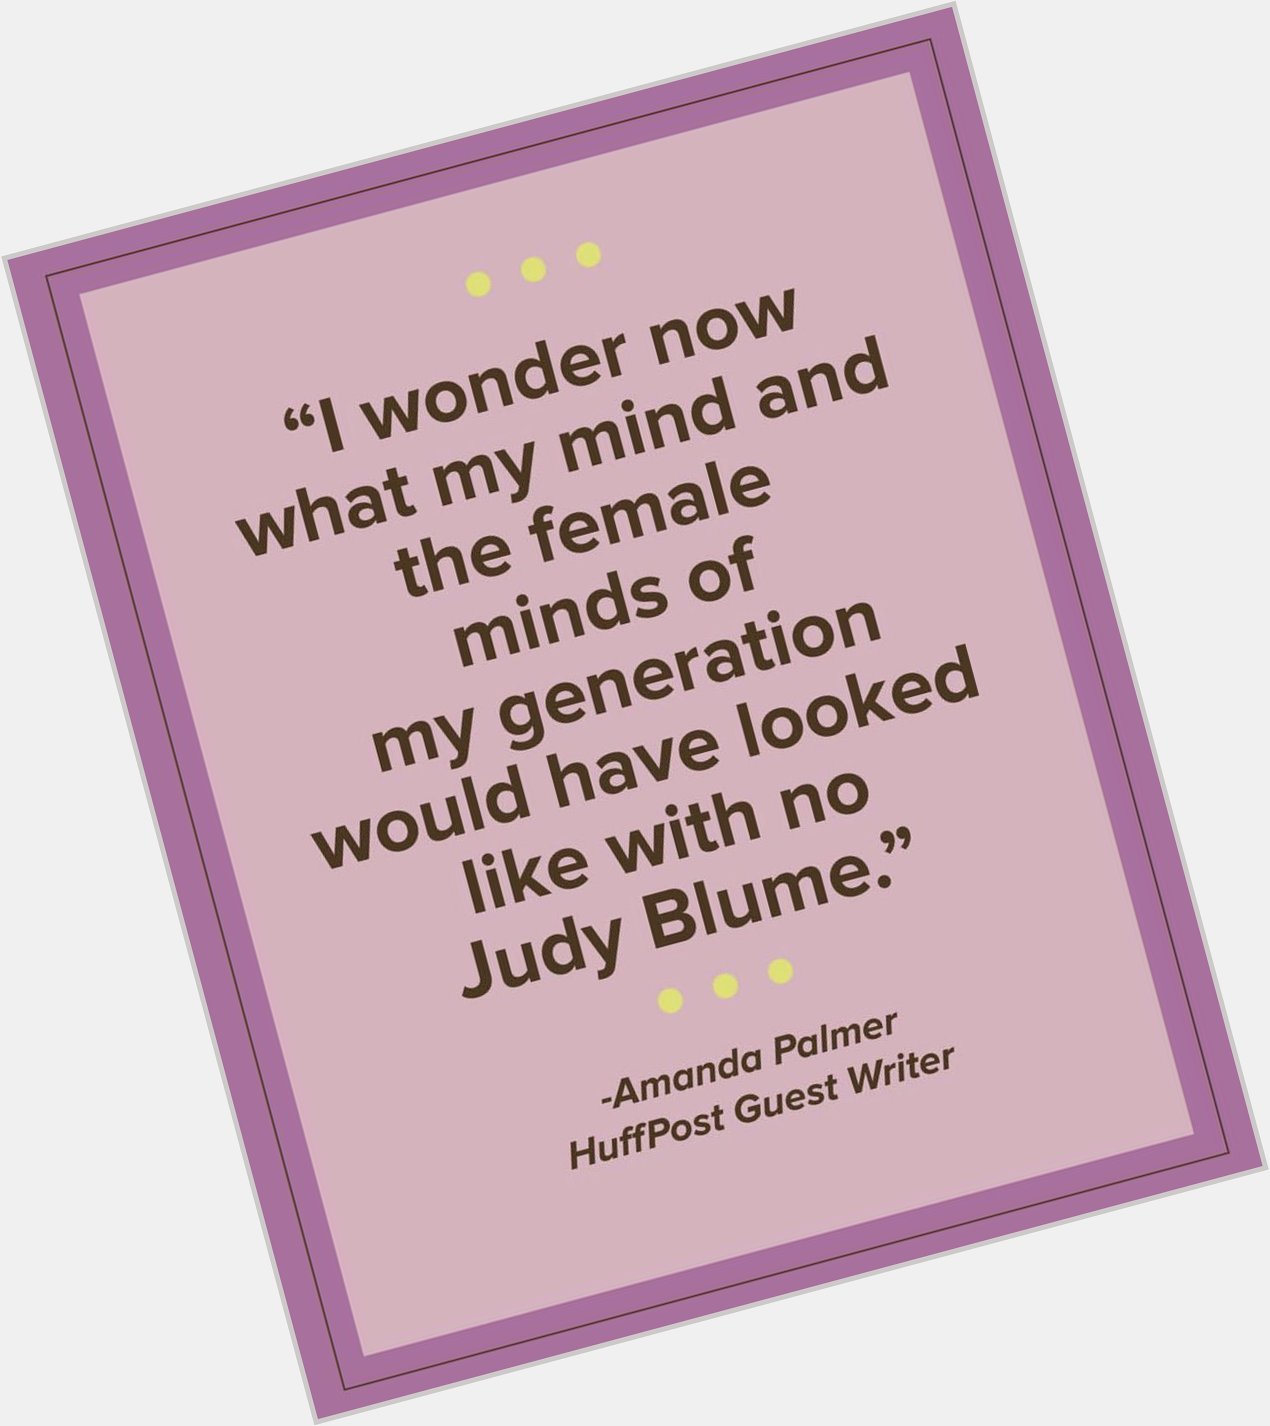 Happy birthday Judy Blume! What was your favorite book authored by Judy?! 